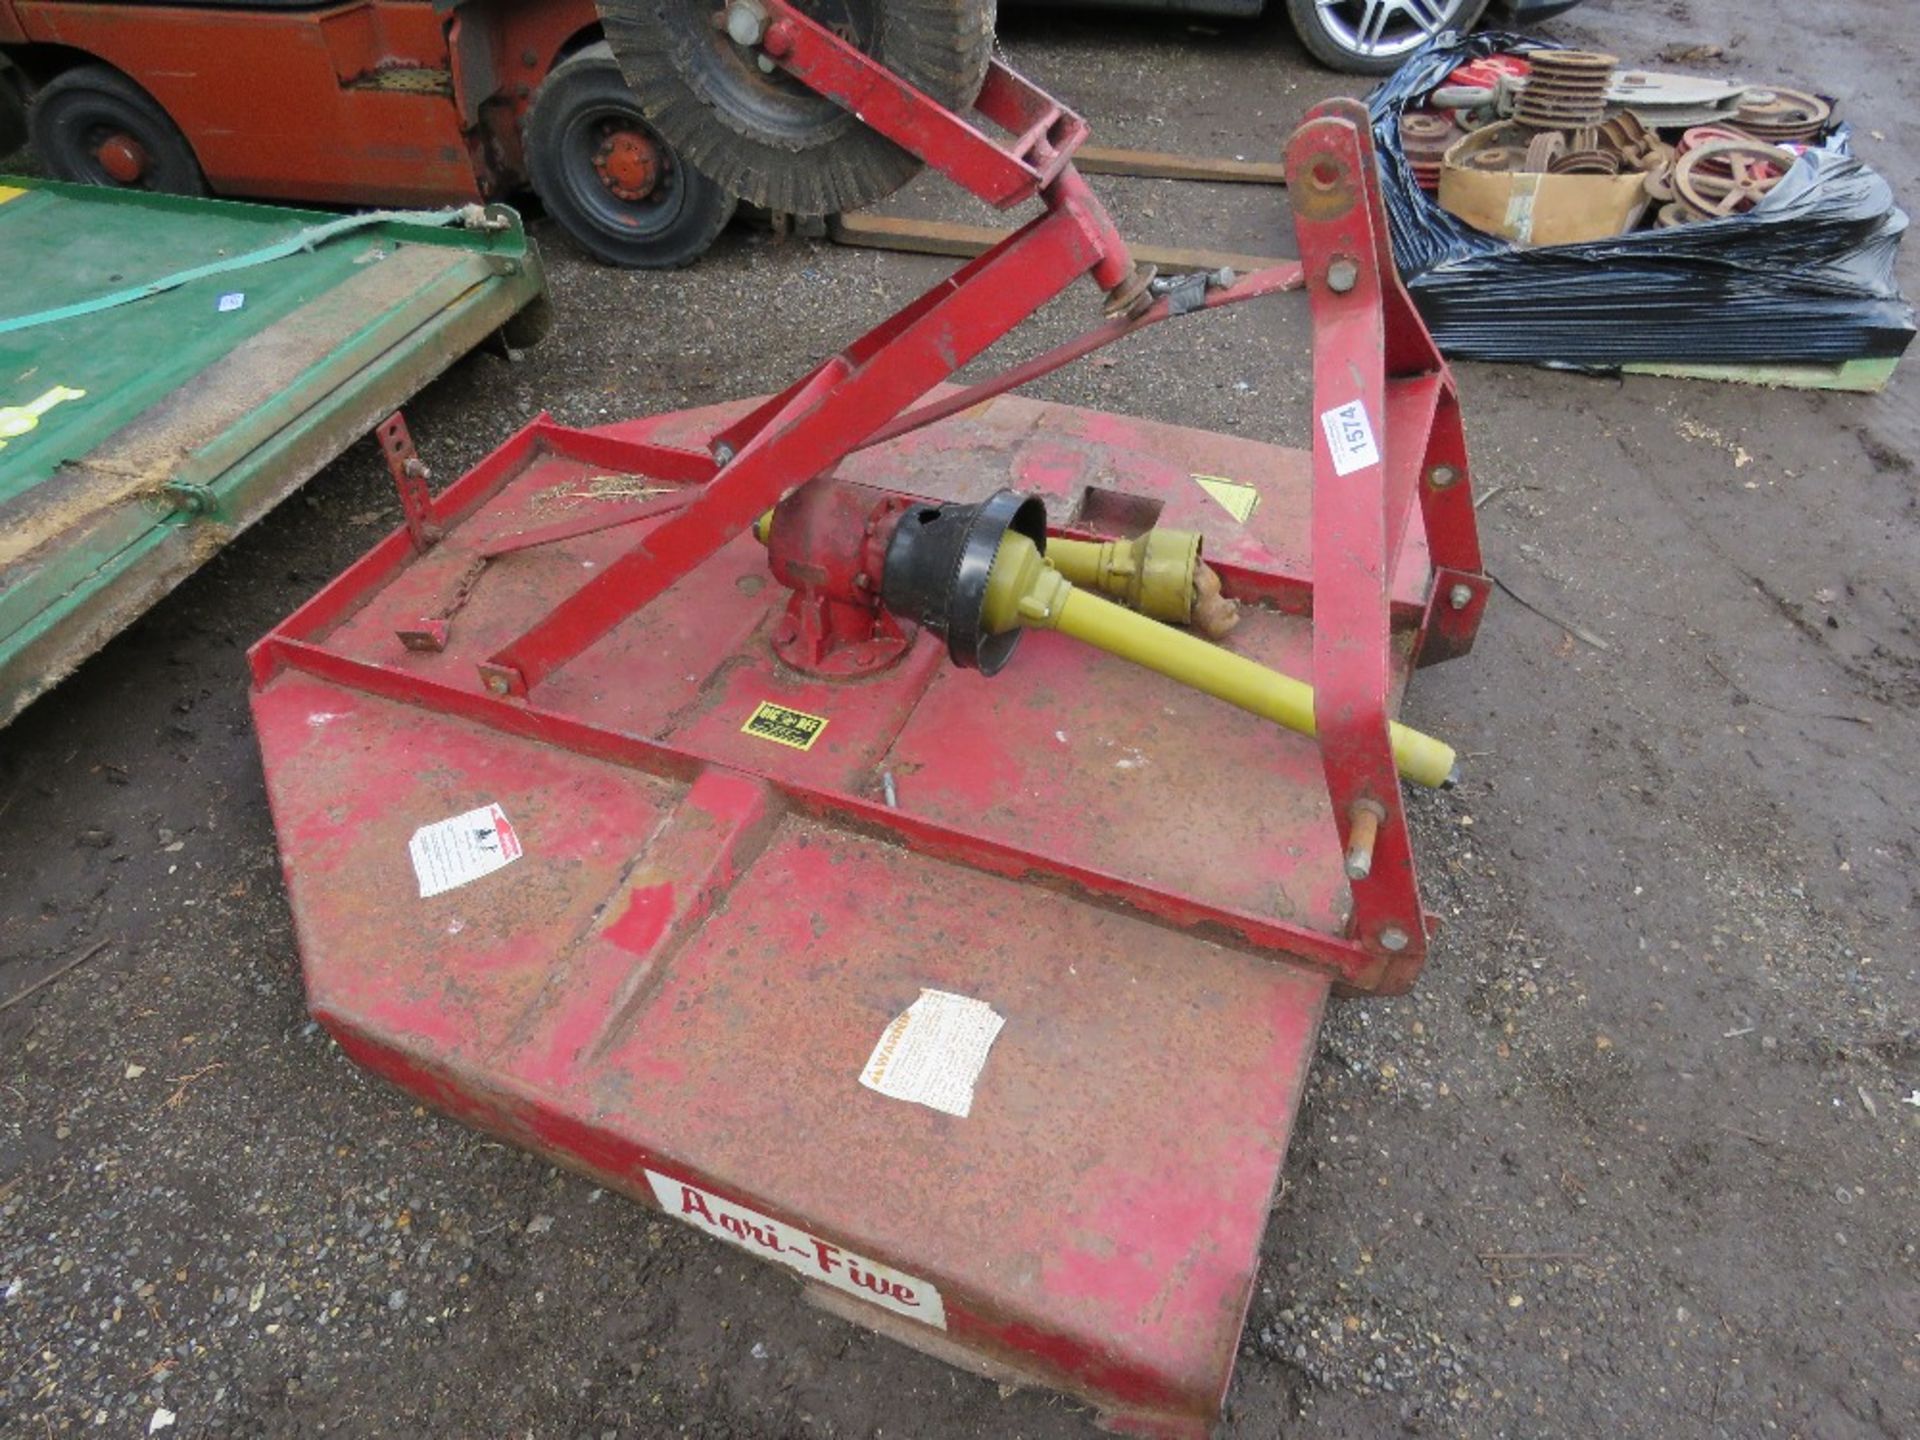 BIG BEE 5FT WIDE AGRICULTURAL TRACTOR MOUNTED TOPPER. WITH PTO SHAFT. THIS LOT IS SOLD UNDER THE